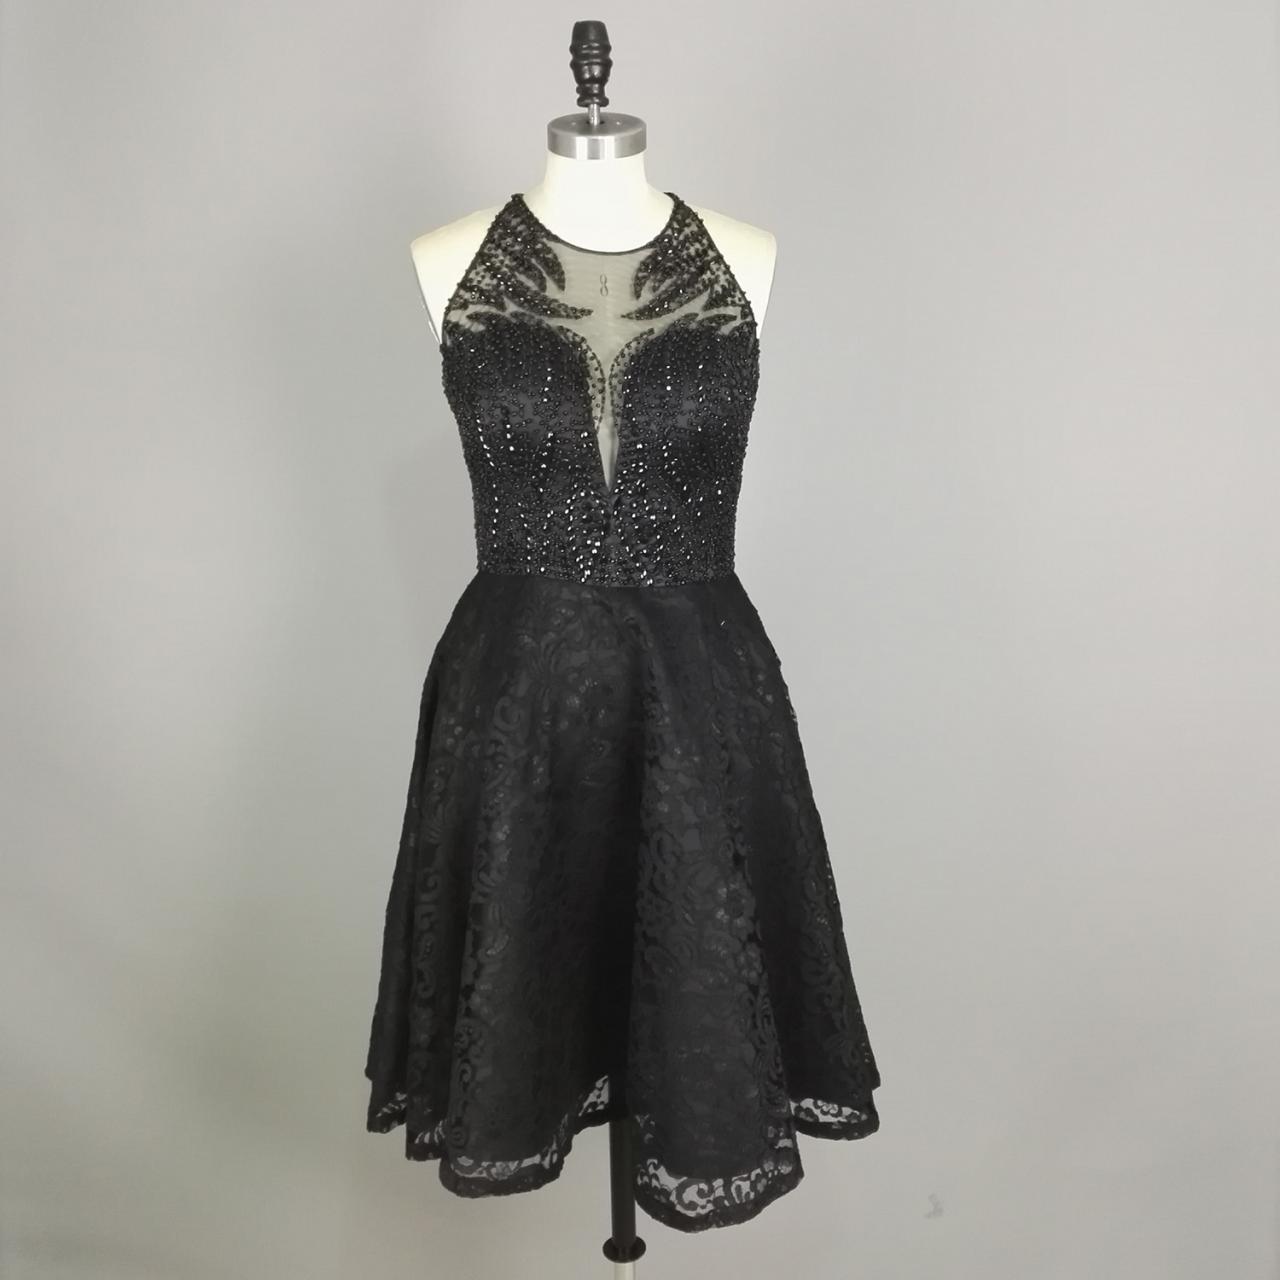 Black Beaded Lace Homecoming Dress,sexy Black Beaded Backless Short Prom Dresses,front Short And Long Back Evening Gowns 2017